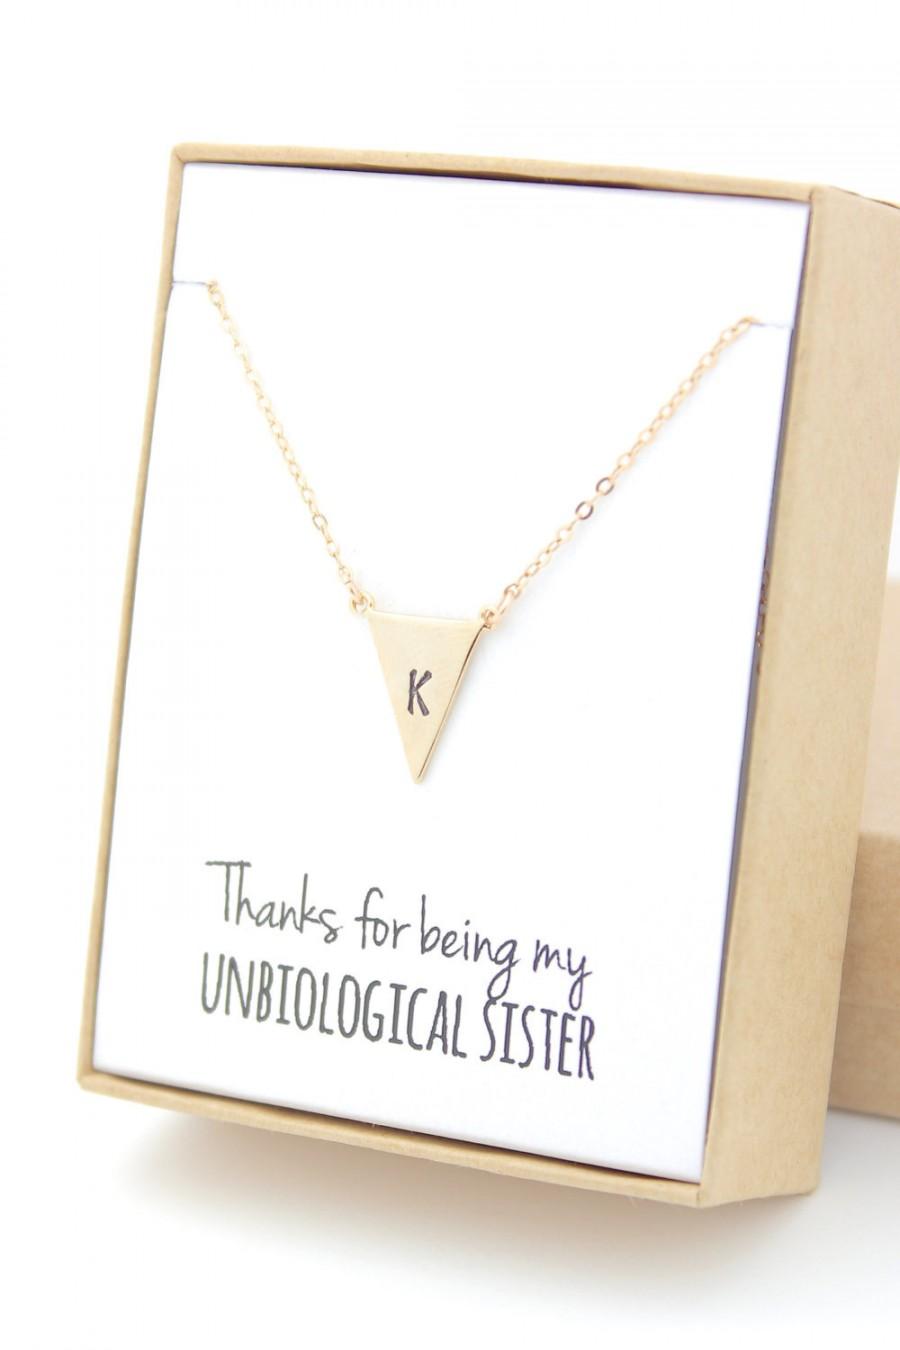 Mariage - Gold Triangle Letter Necklace - Bridesmaid Gift Jewelry - Unbiological Sister - Personalized Necklace - Initial Letter - Larger Triangle